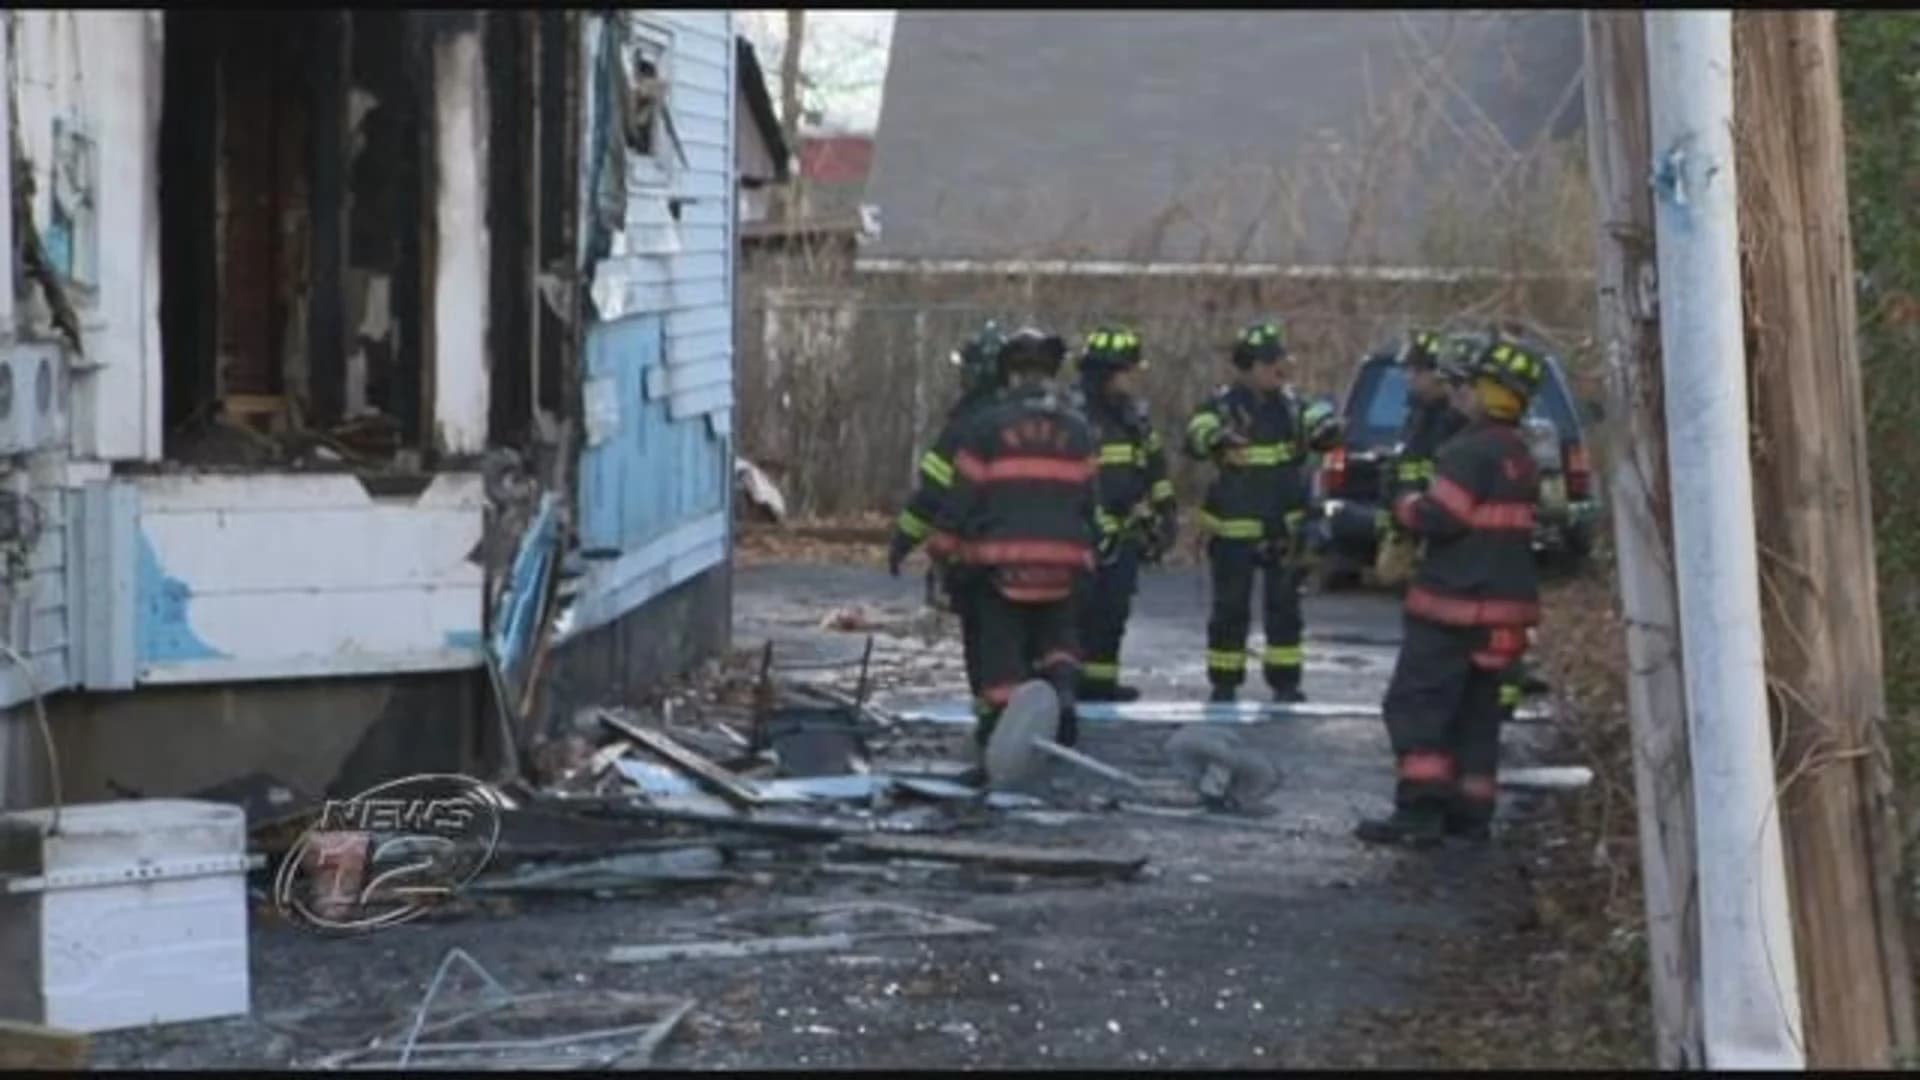 Fire official: Deadly W. Haverstraw fire "does not appear suspicious"